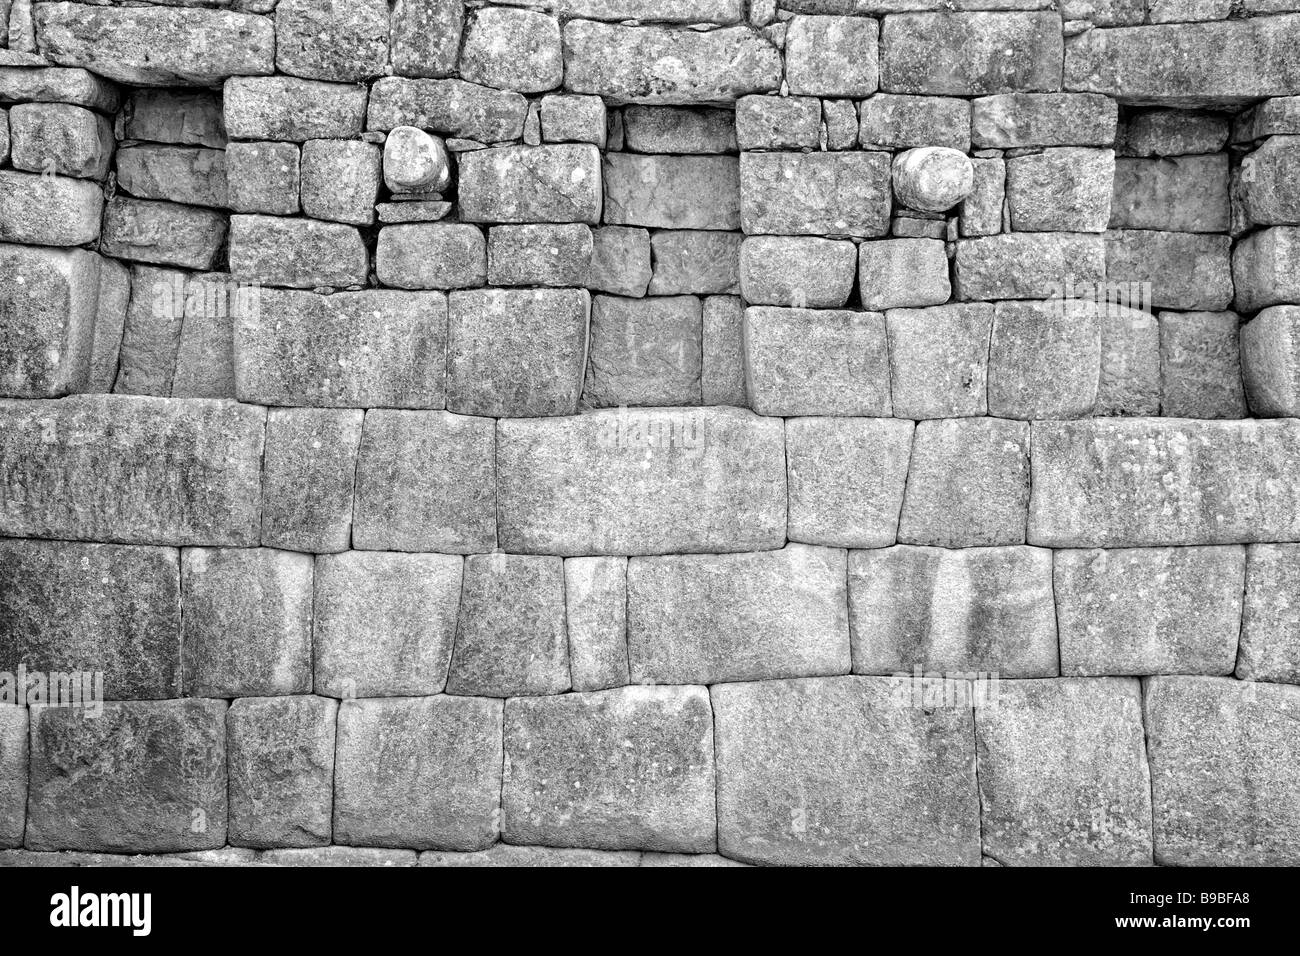 Inca history Black and White Stock Photos & Images - Alamy